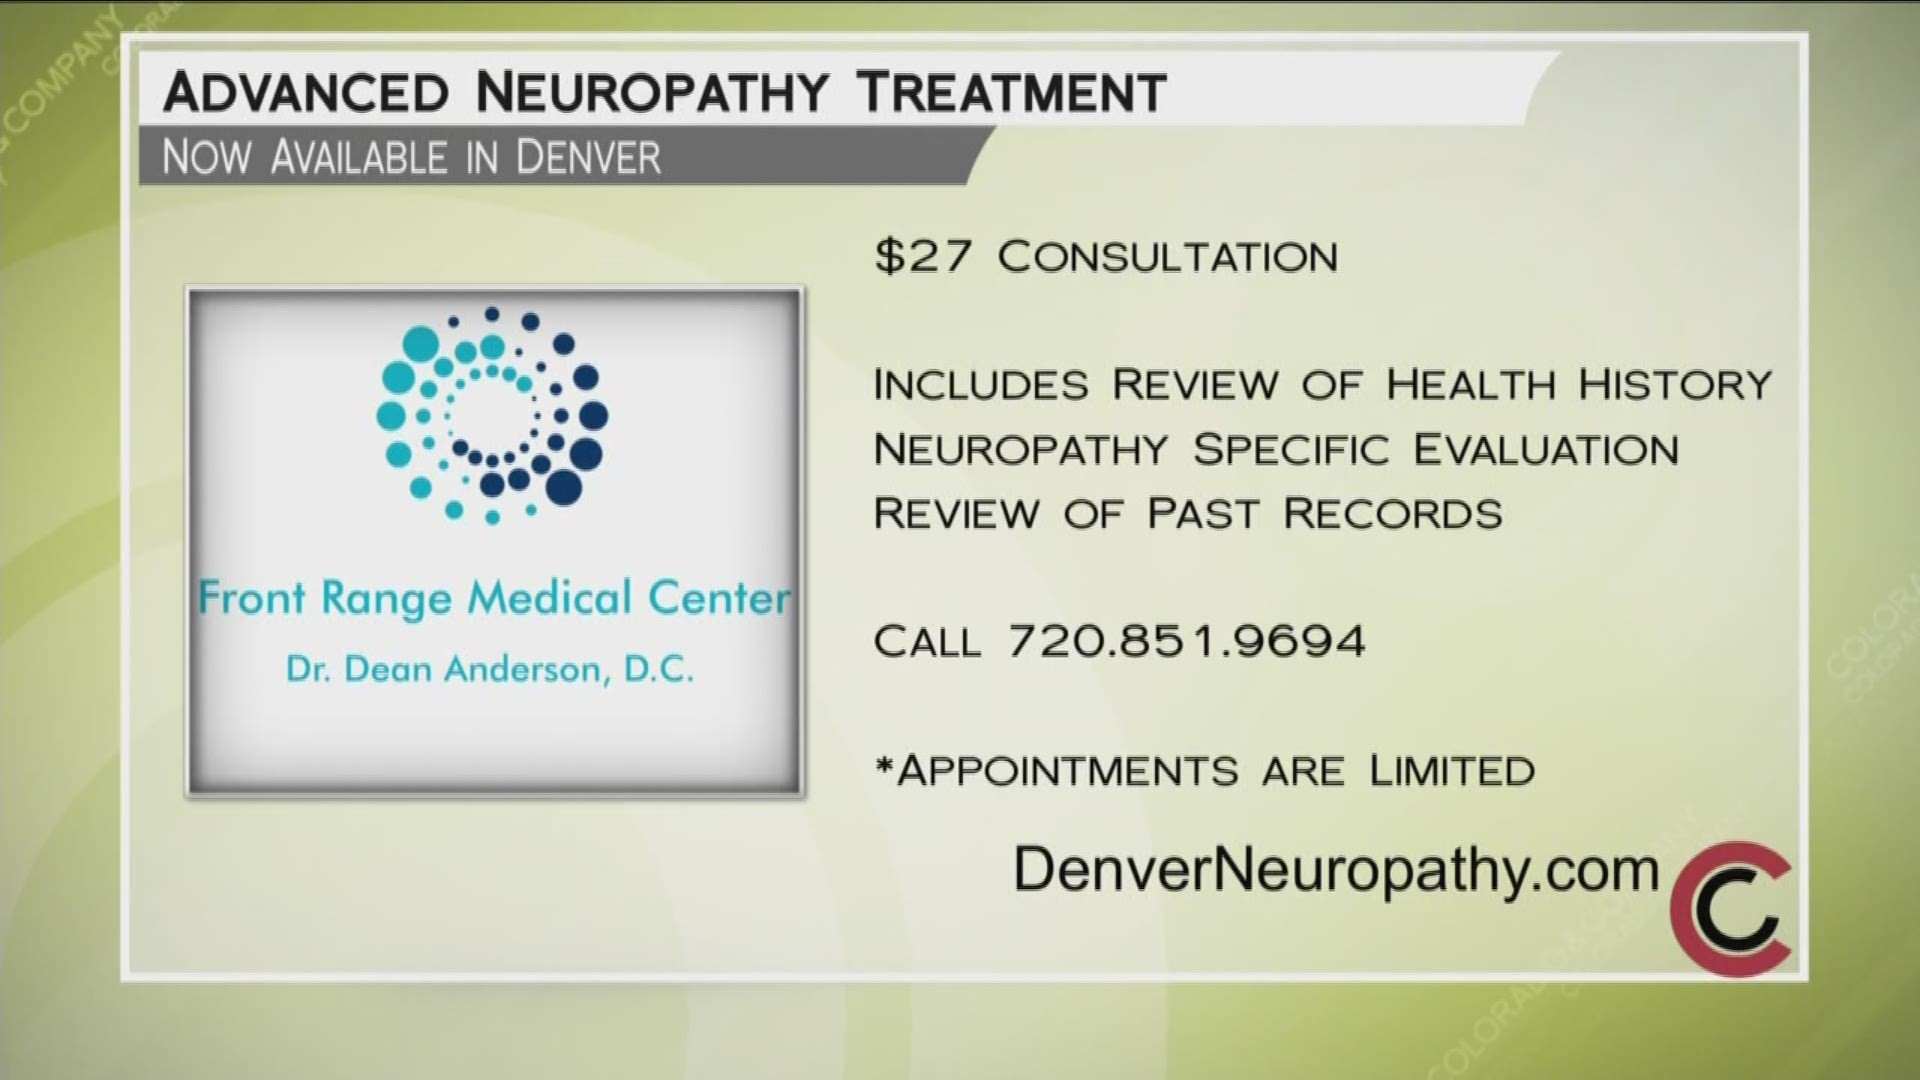 Schedule your consultation with Dr. Dean Anderson today. Appointments are limited, so call 720.851.9694. The consultation includes looking at your personal health history, a confidential questionnaire, and a patient-specific neuropathy exam—all to determine if you’re a good fit for Dr. Anderson’s treatment. The consultation is only $27, normally $245! Learn more online at www.DenverNeuropathy.com. 
THIS INTERVIEW HAS COMMERCIAL CONTENT. PRODUCTS AND SERVICES FEATURED APPEAR AS PAID ADVERTISING.